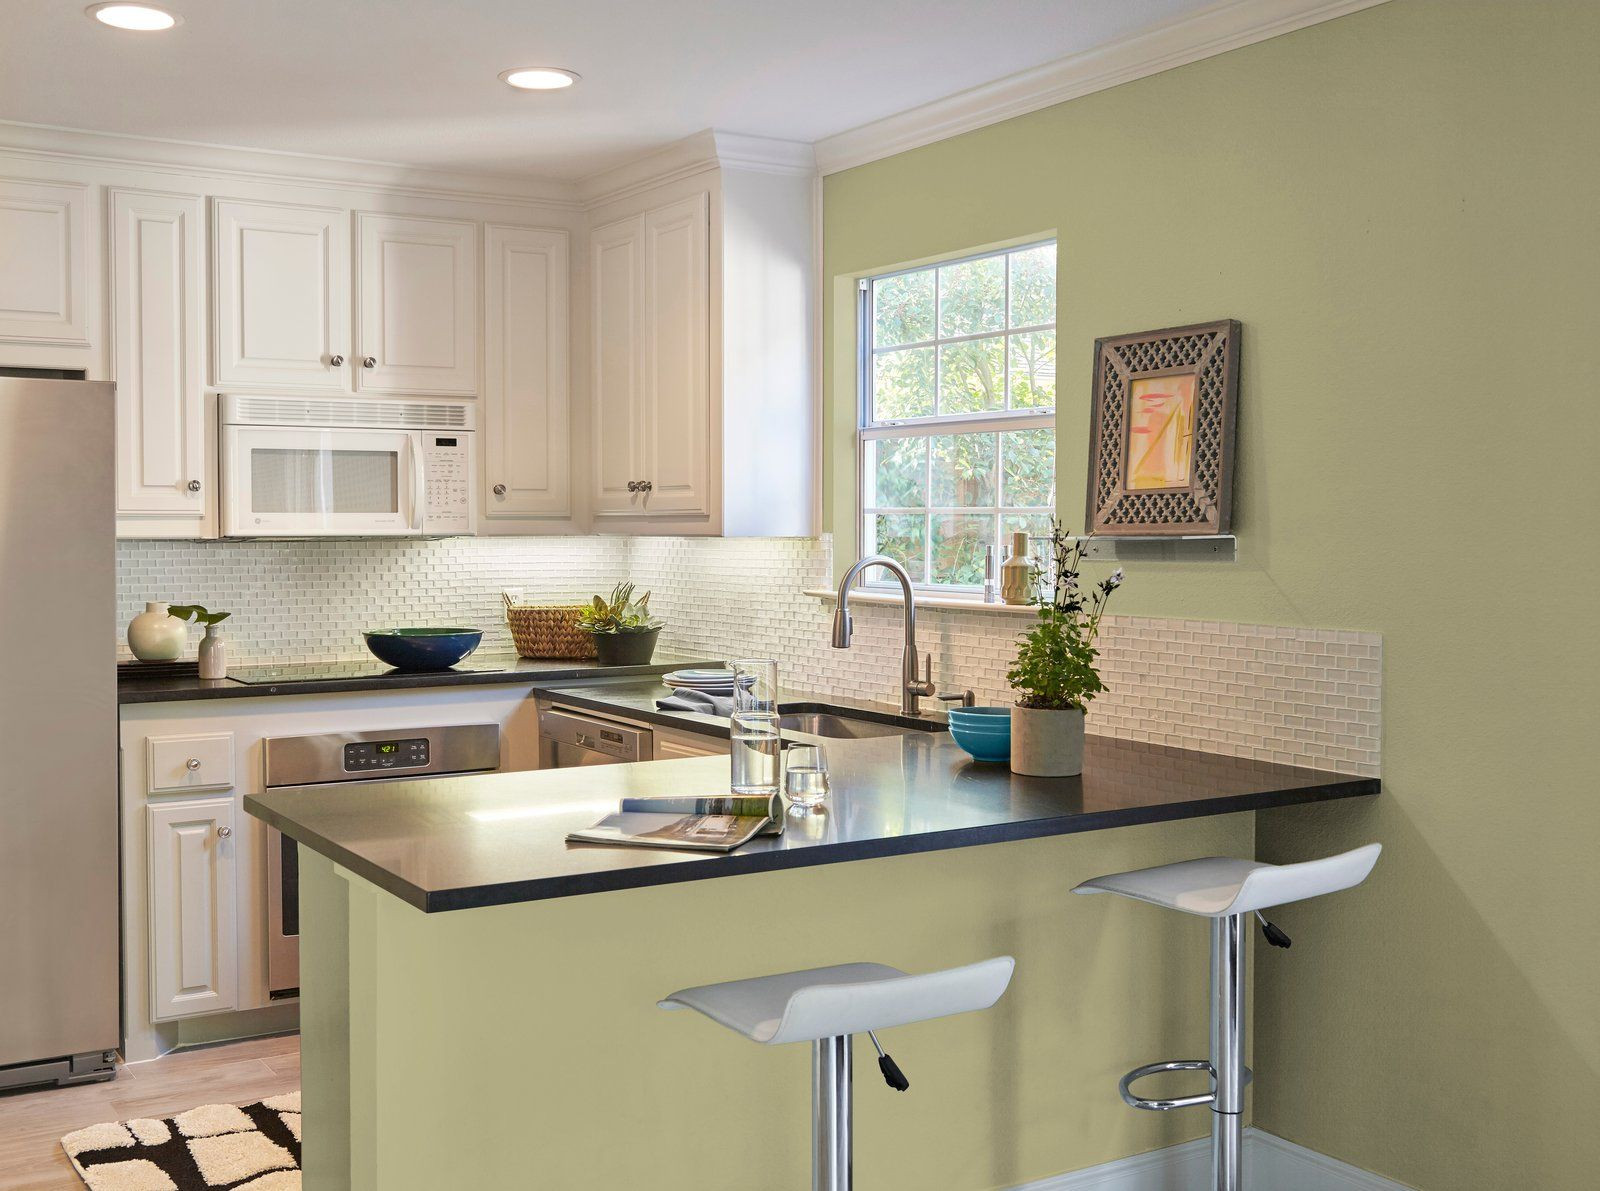 Kitchen Wall Colors 2020
 How To Use Behr s Color of the Year 2020 in 2020